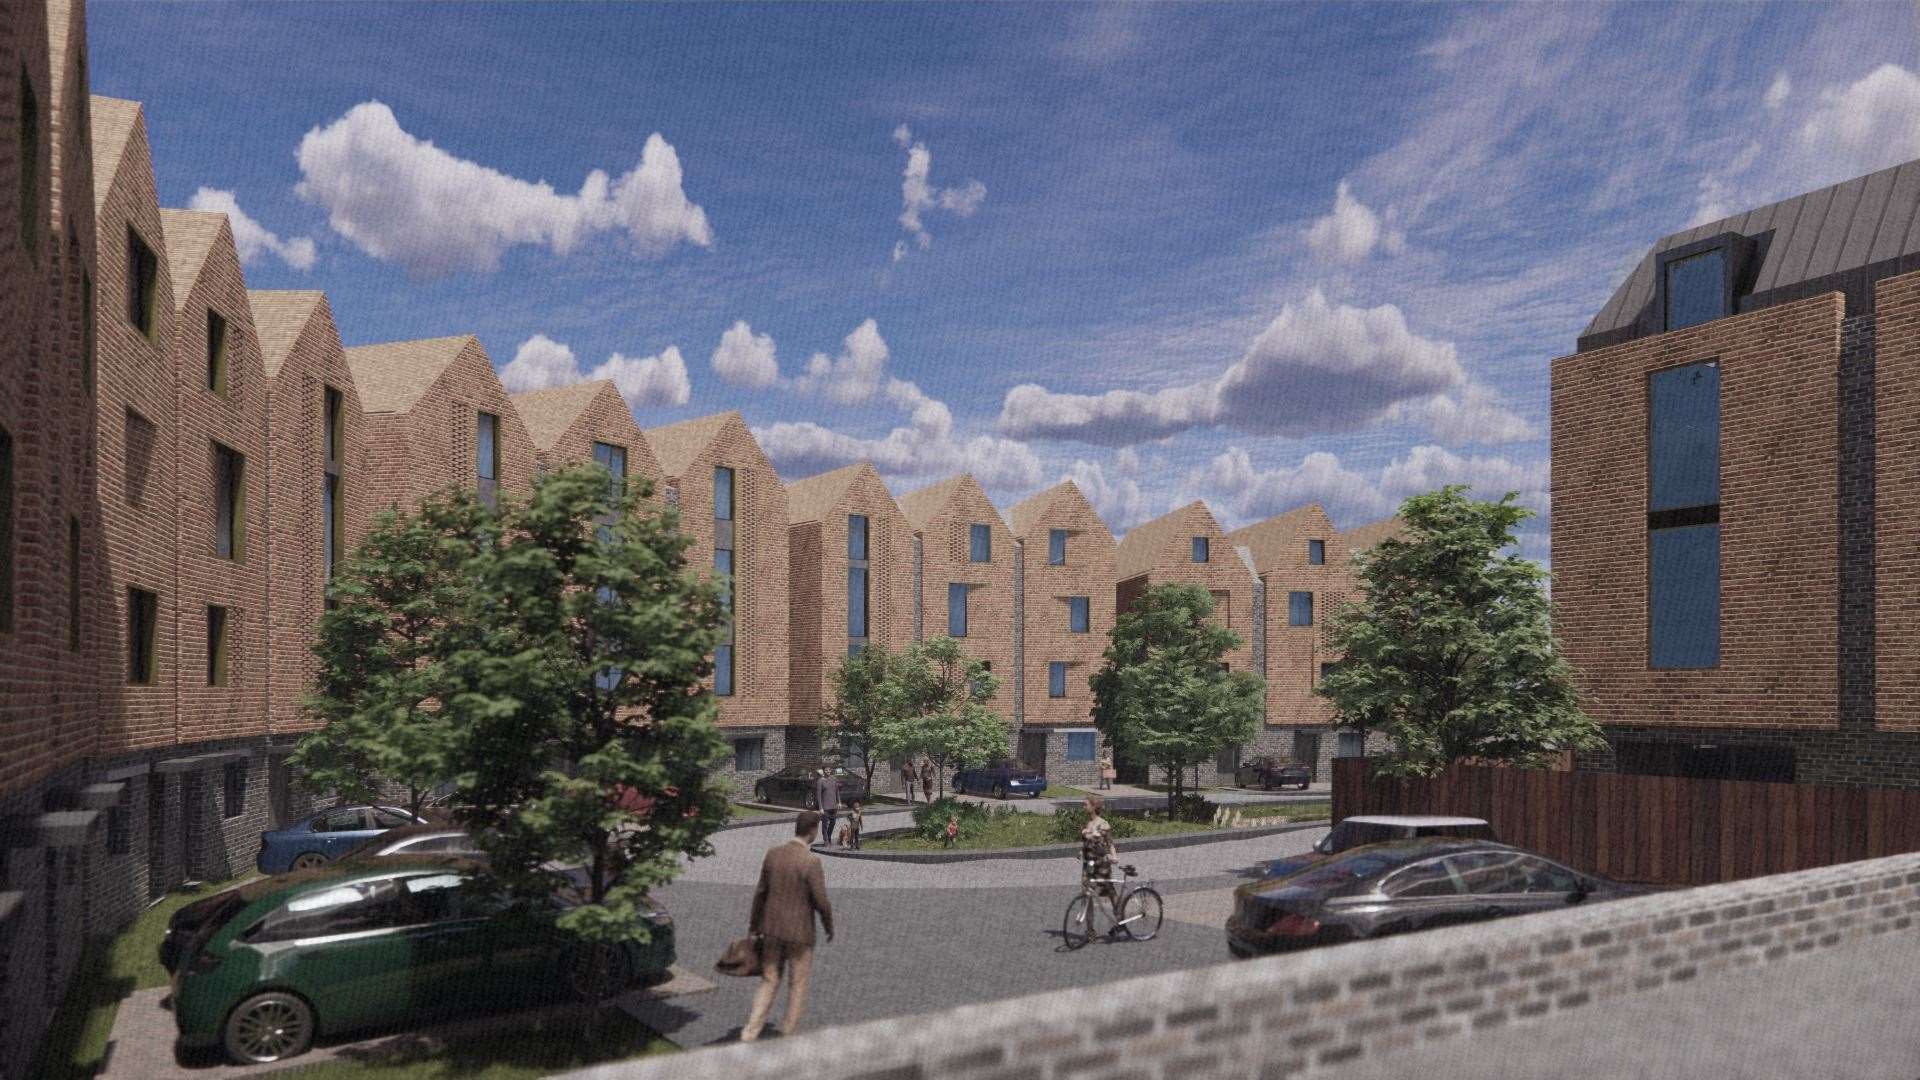 Plans were approved five years ago to develop the Royal Victoria Hospital in Folkestone. Picture: Hollaway Architects